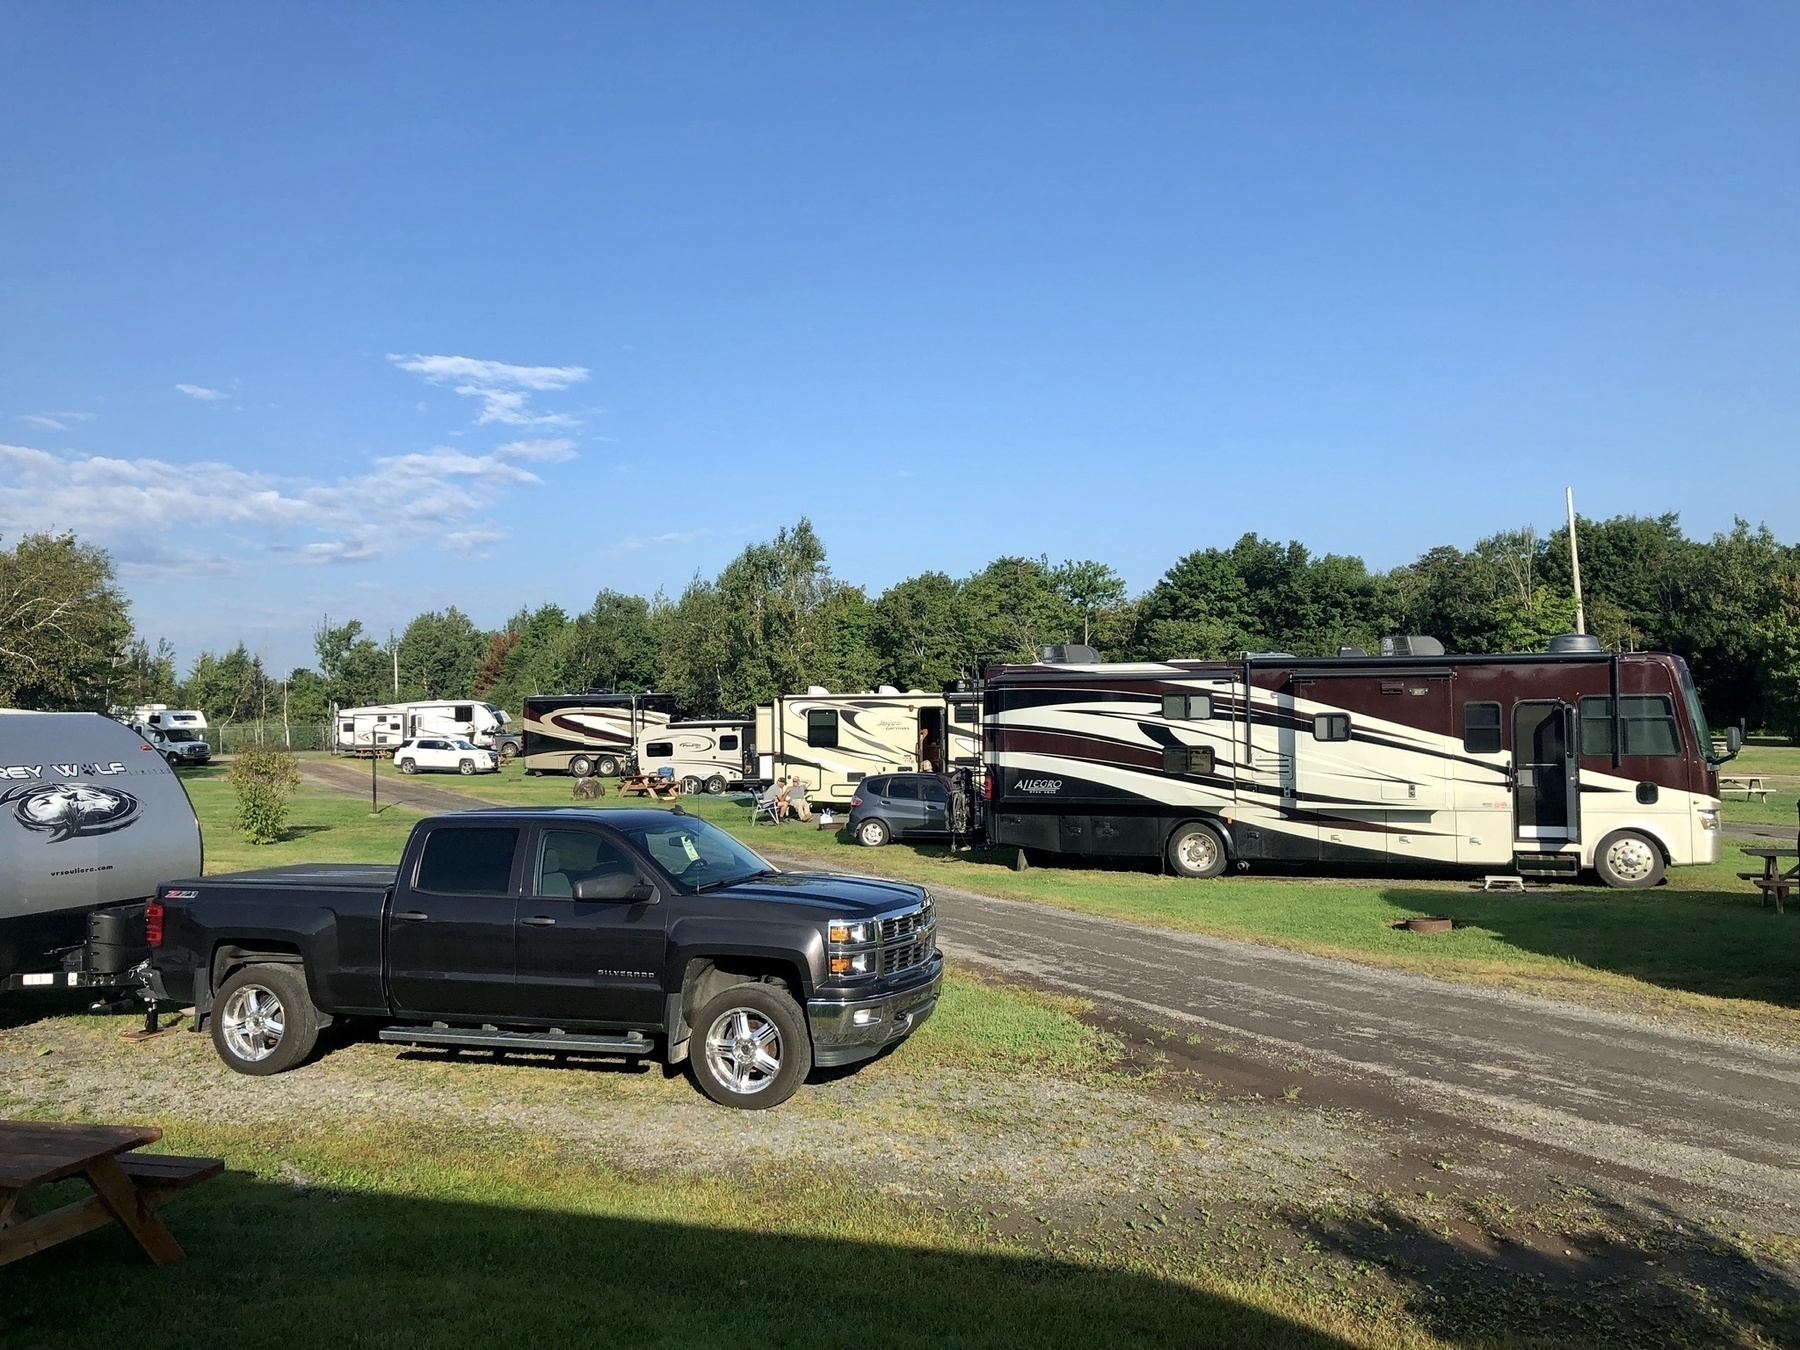 row of fifth wheel trailers and motorhomes on grass